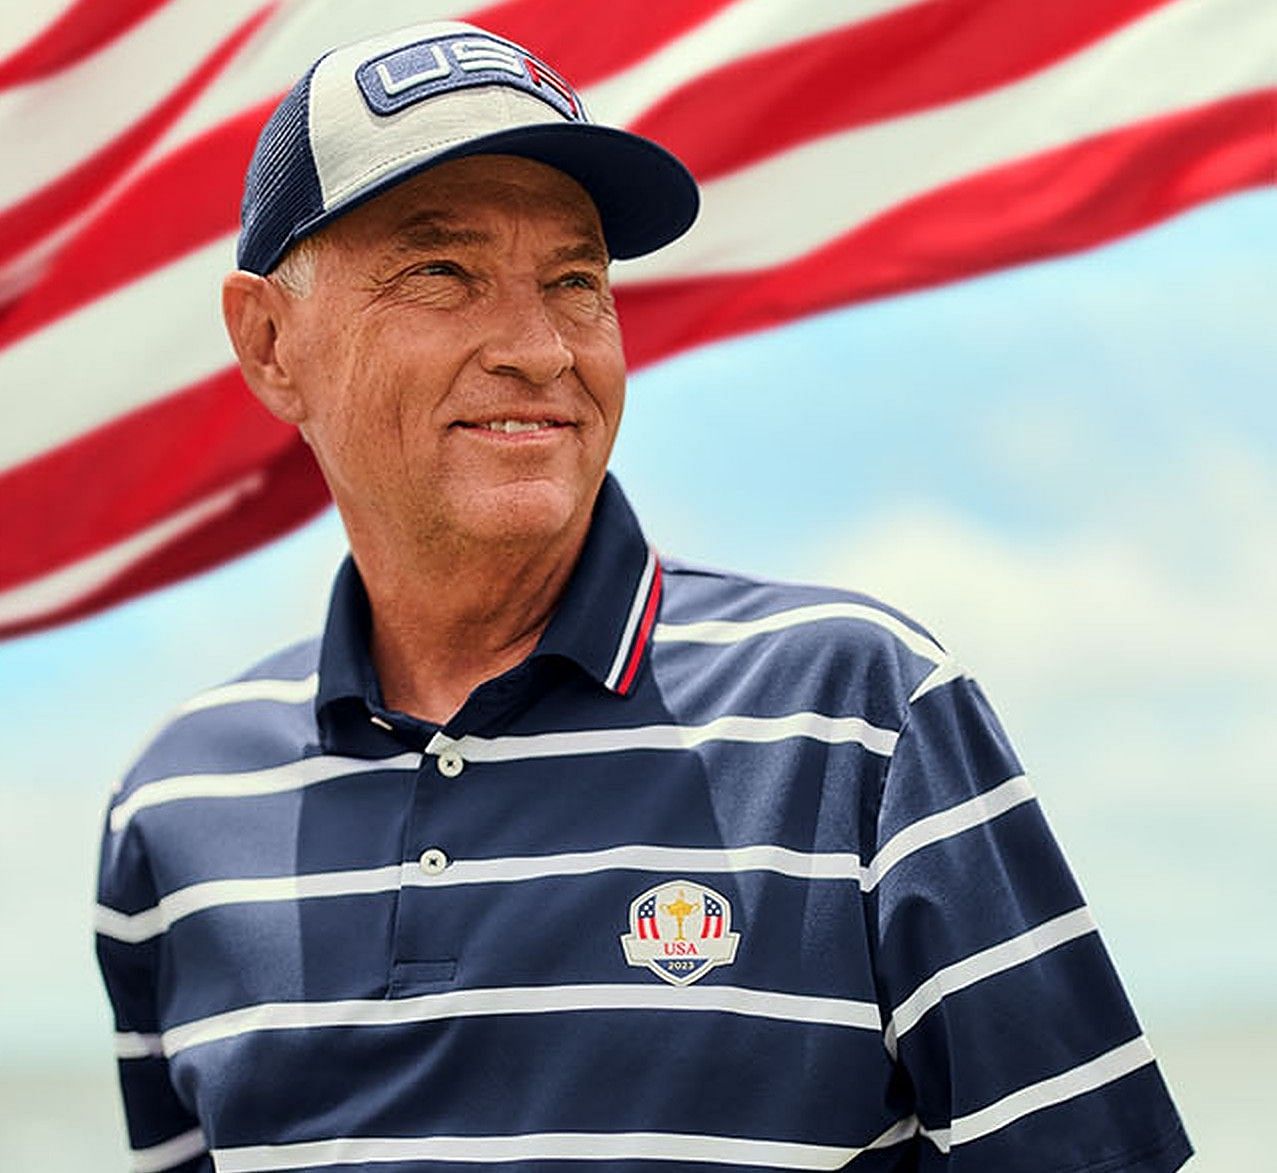 USA Team Friday Ryder Cup outfit (Image via Ralph Lauren)